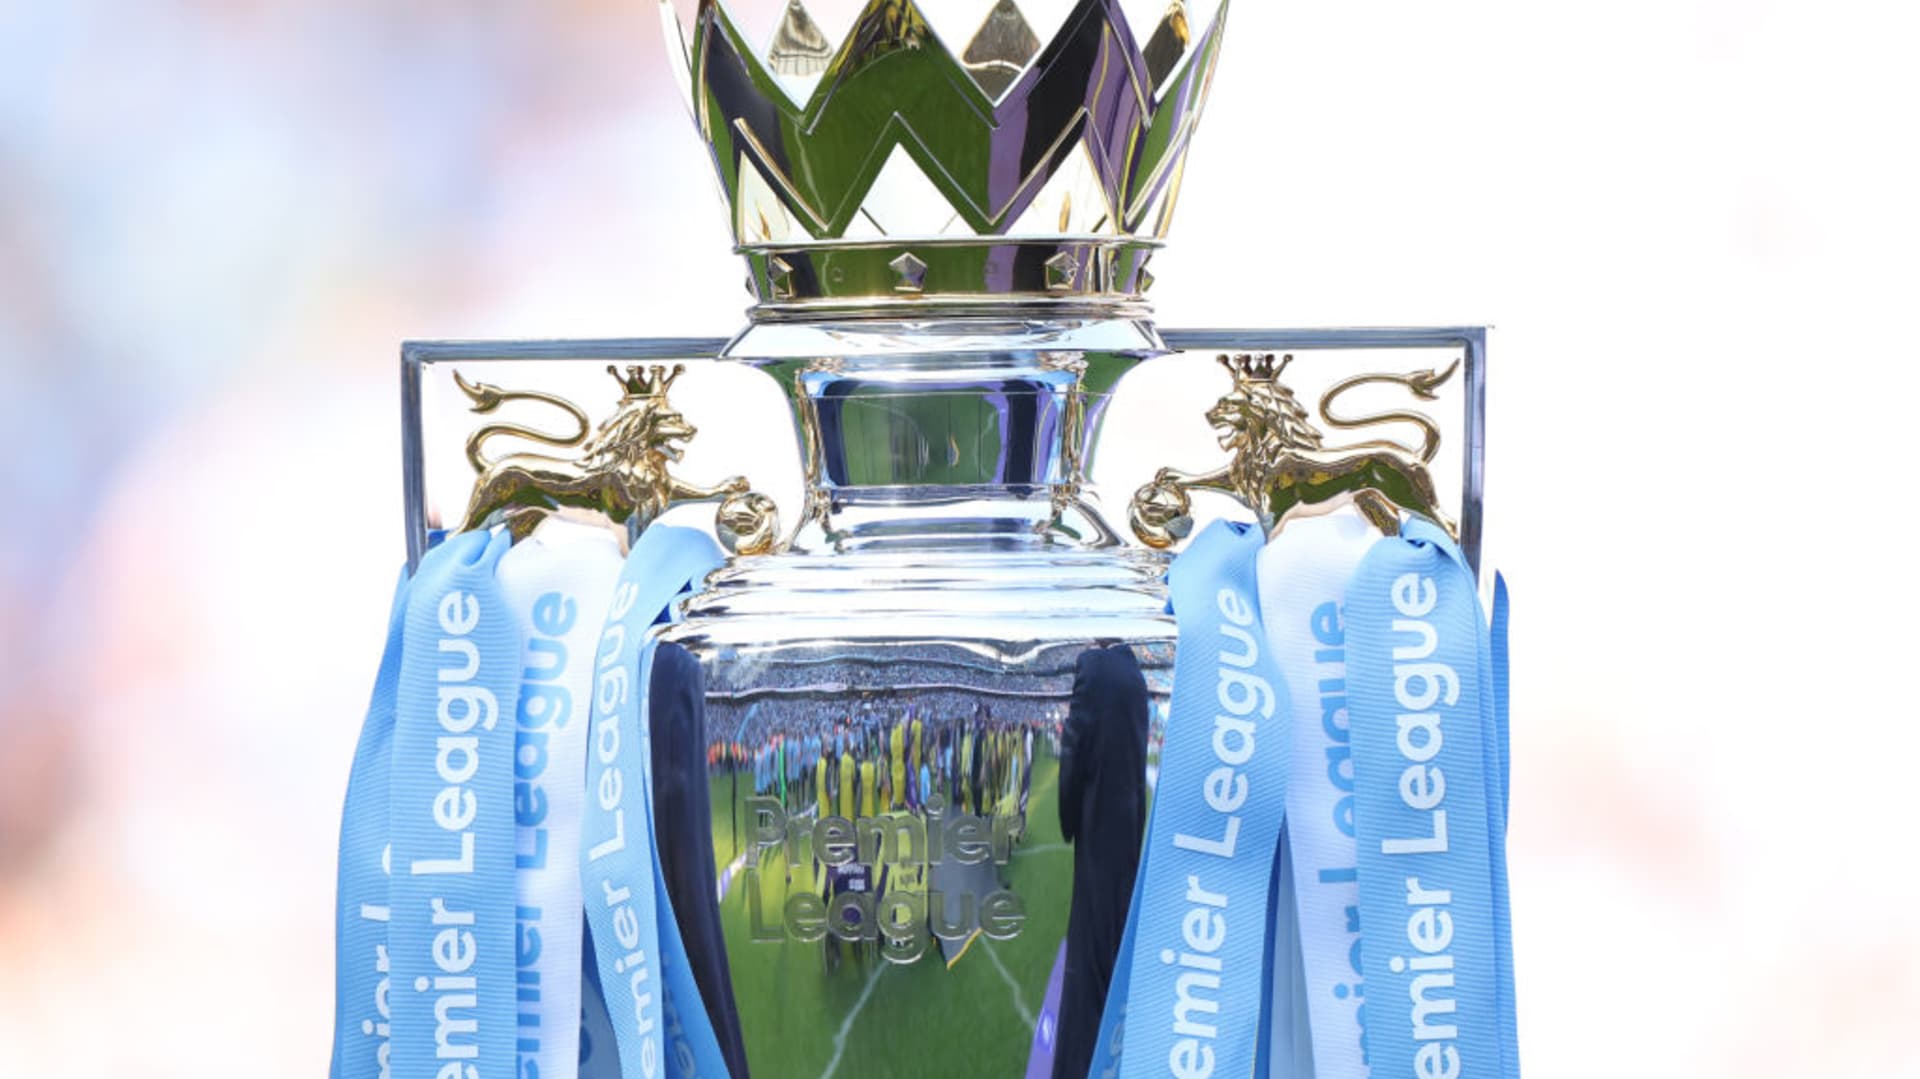 Premier League 2023-24 Get schedule and watch EPL live streaming and telecast in India